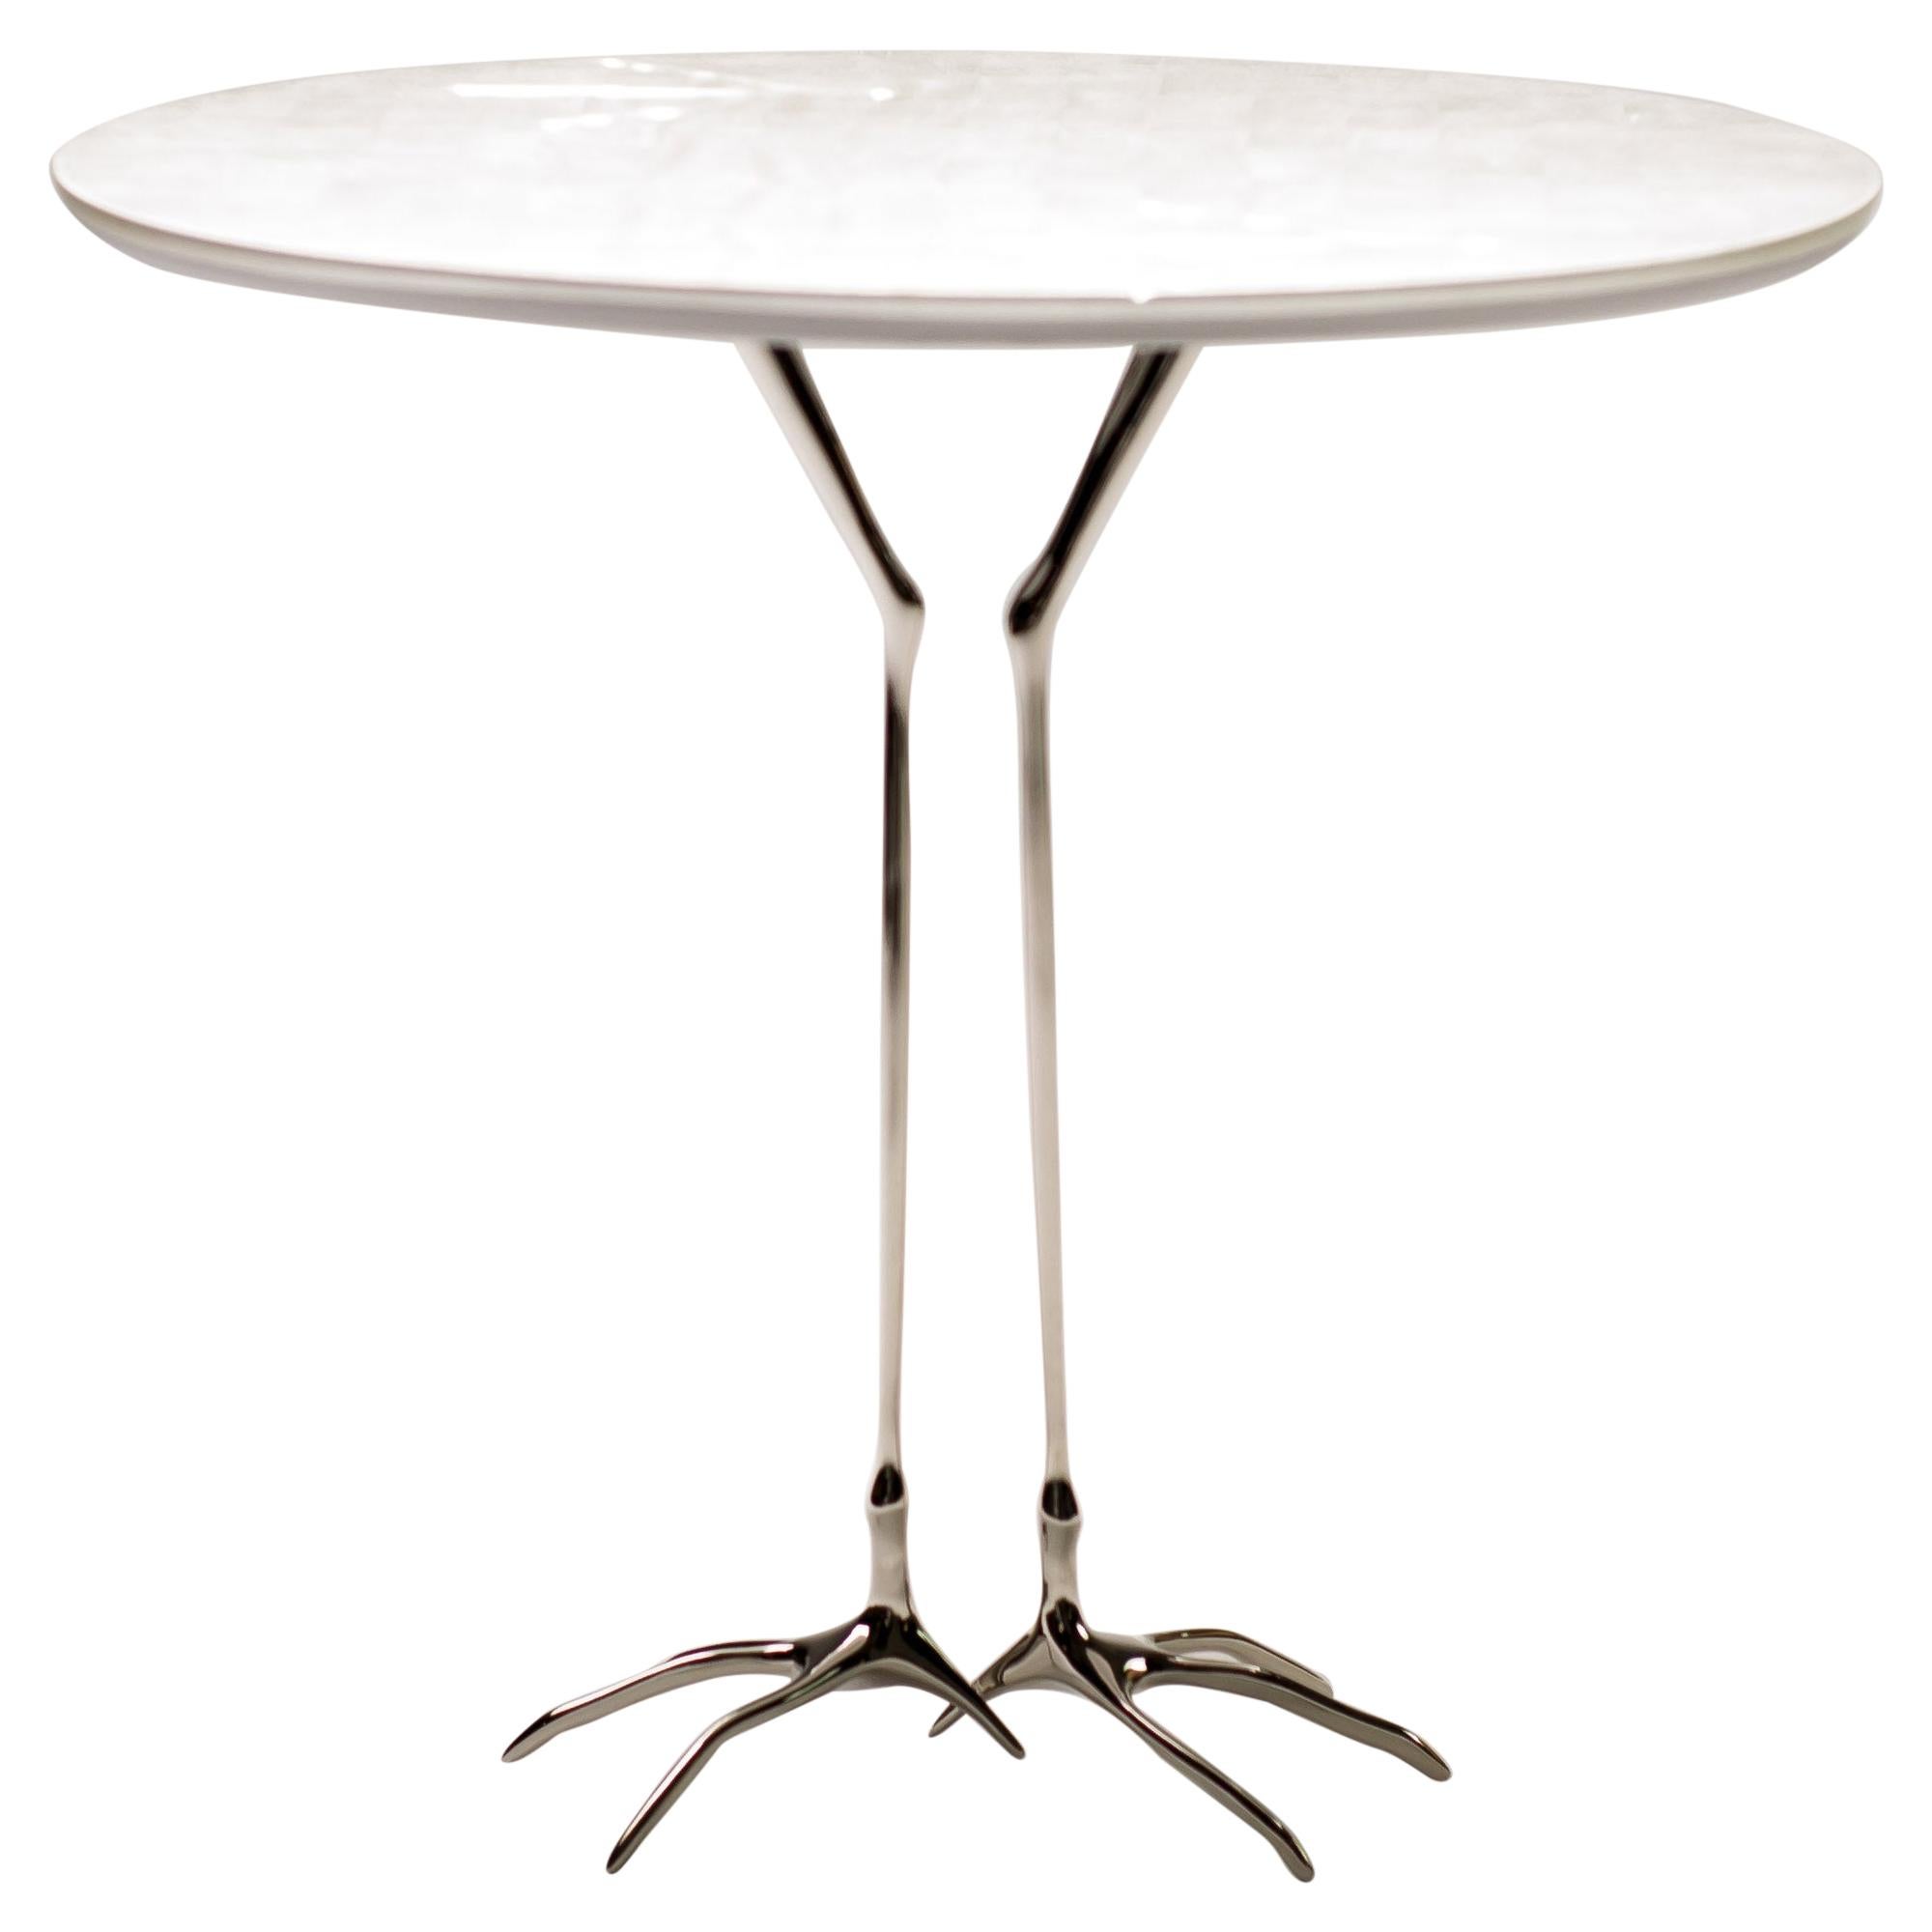 White Gold "Traccia" Table by Meret Oppenheim